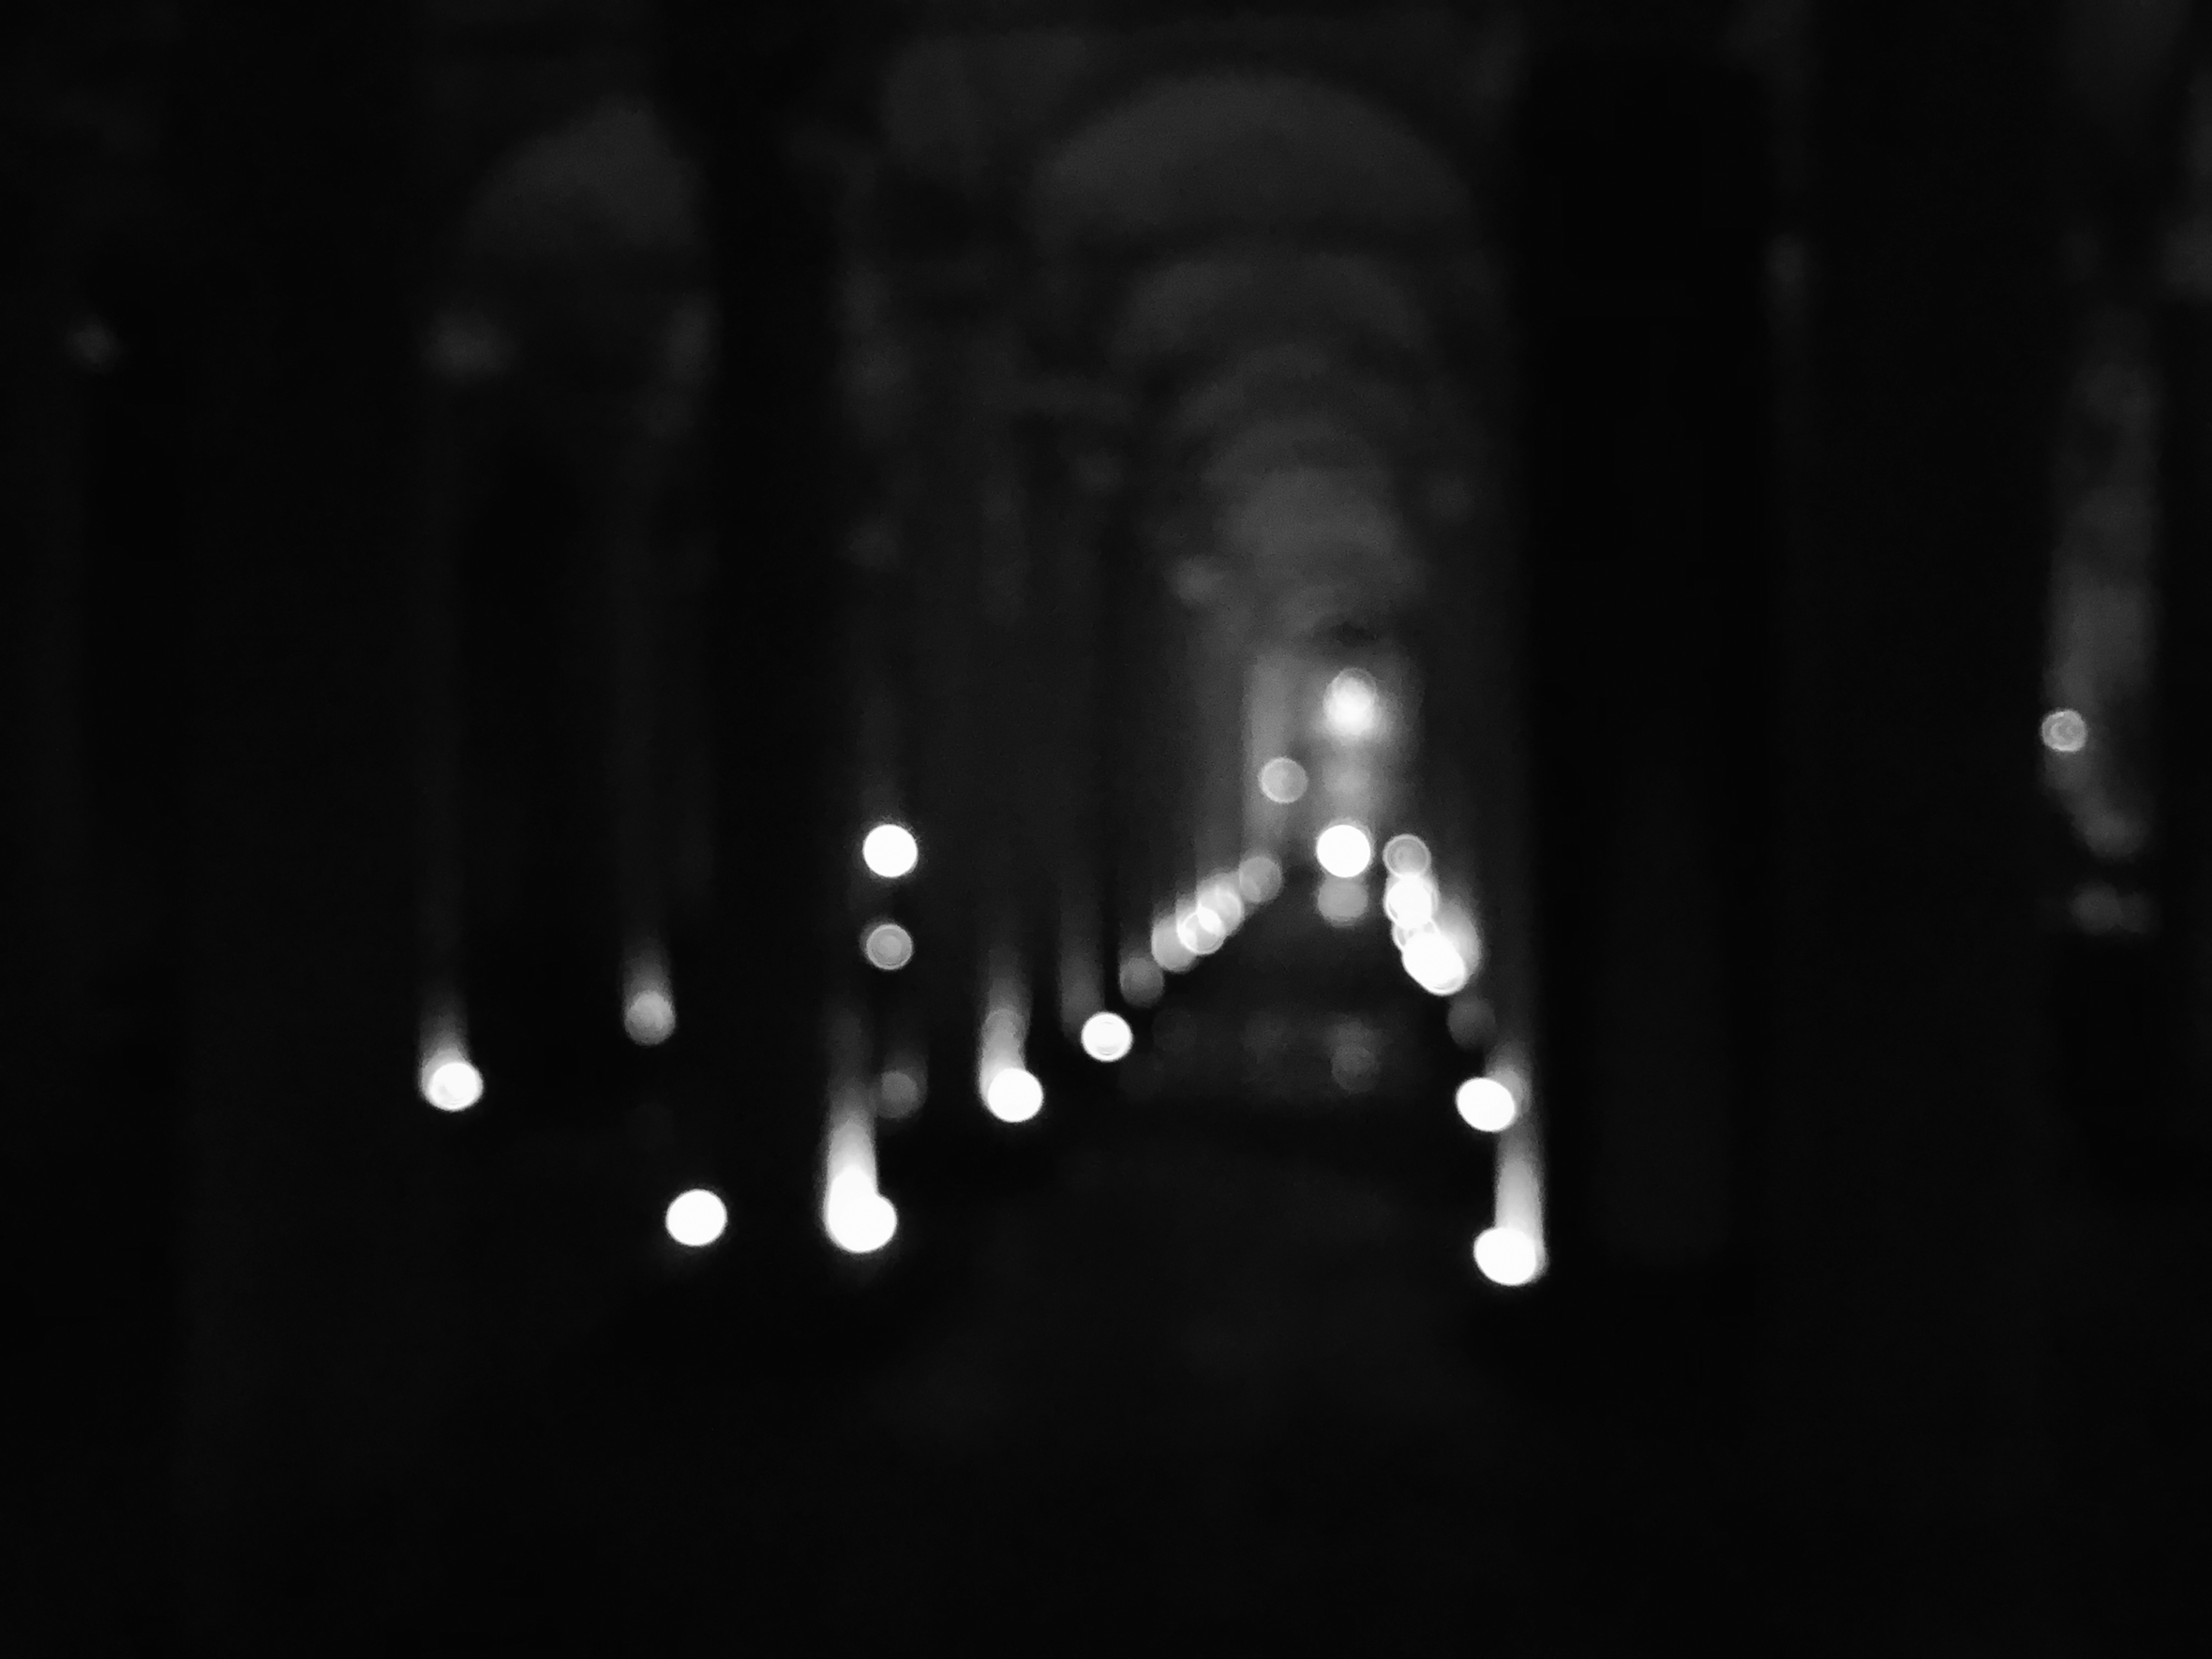 A blurry photo of what appears to be lights on either side of an aisle.